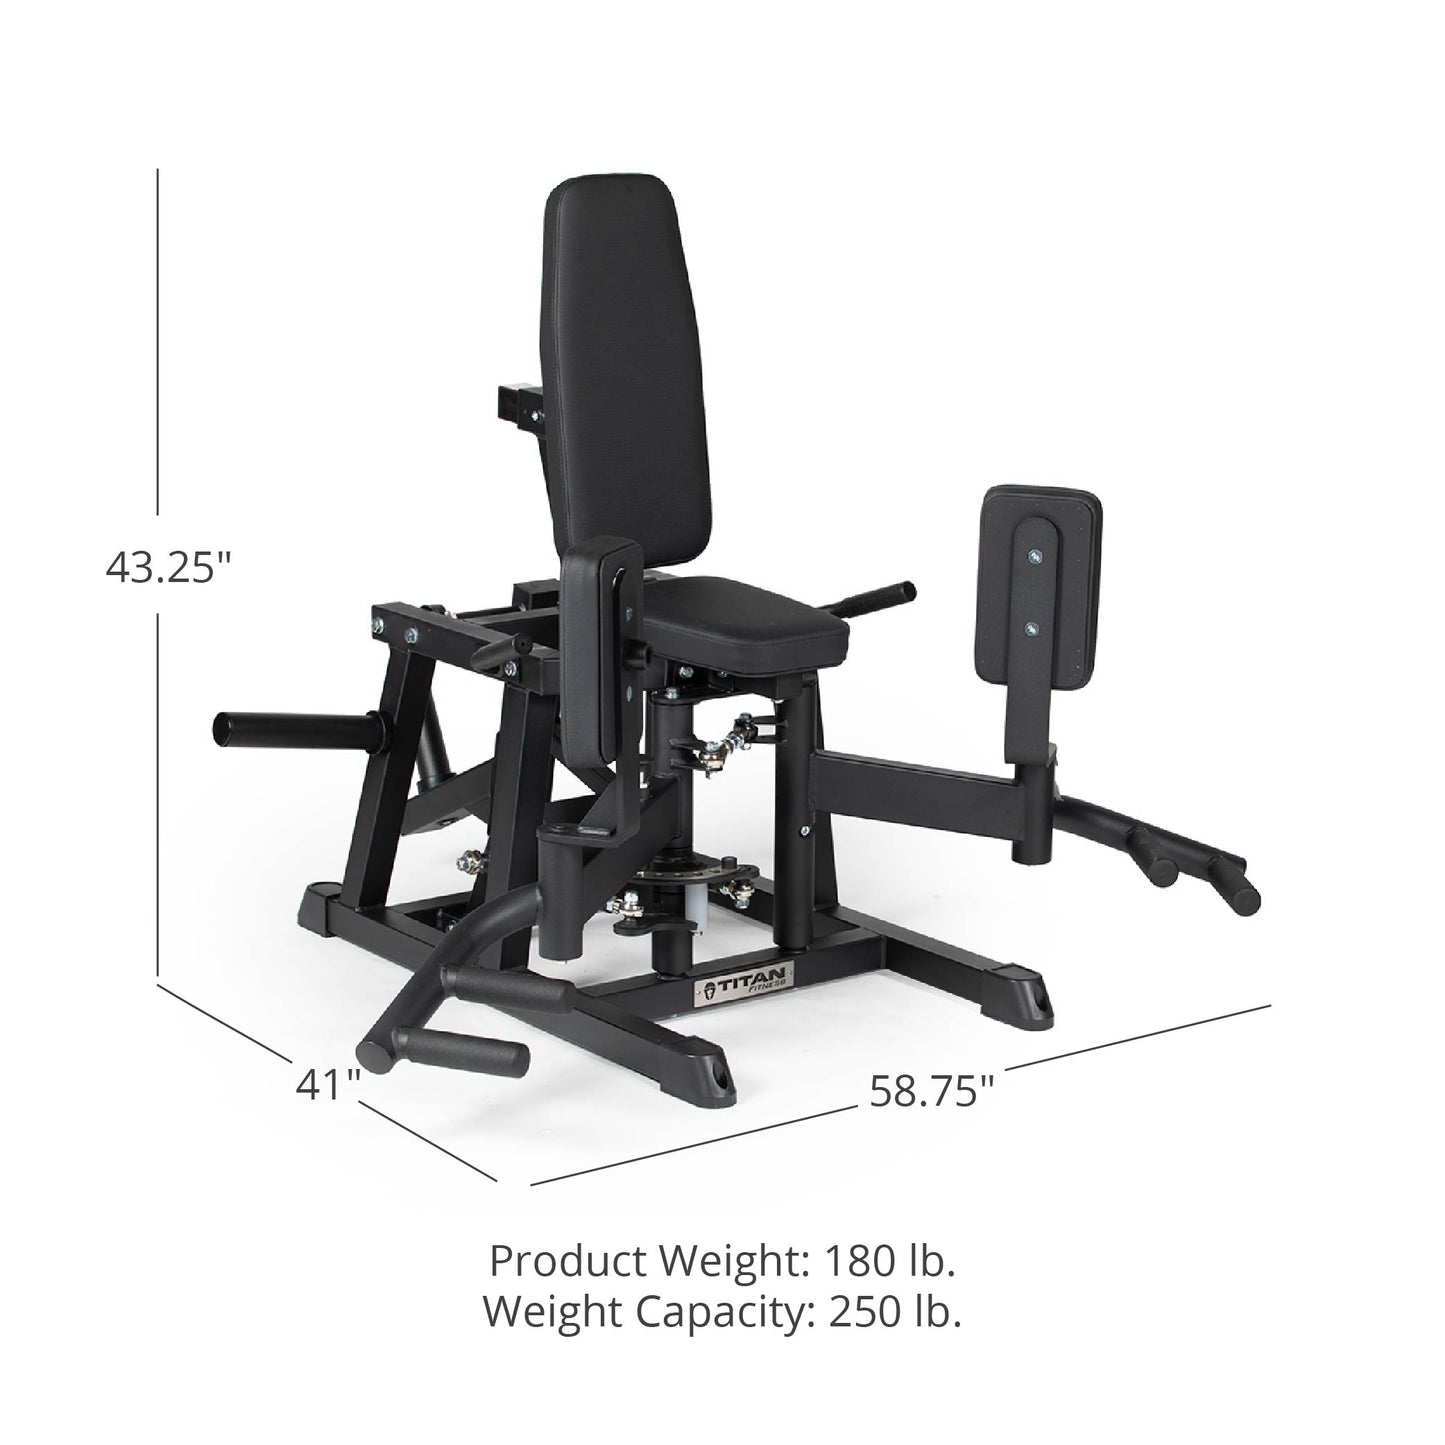 Plate-Loaded Hip Abductor And Adductor Exercise Machine - view 12